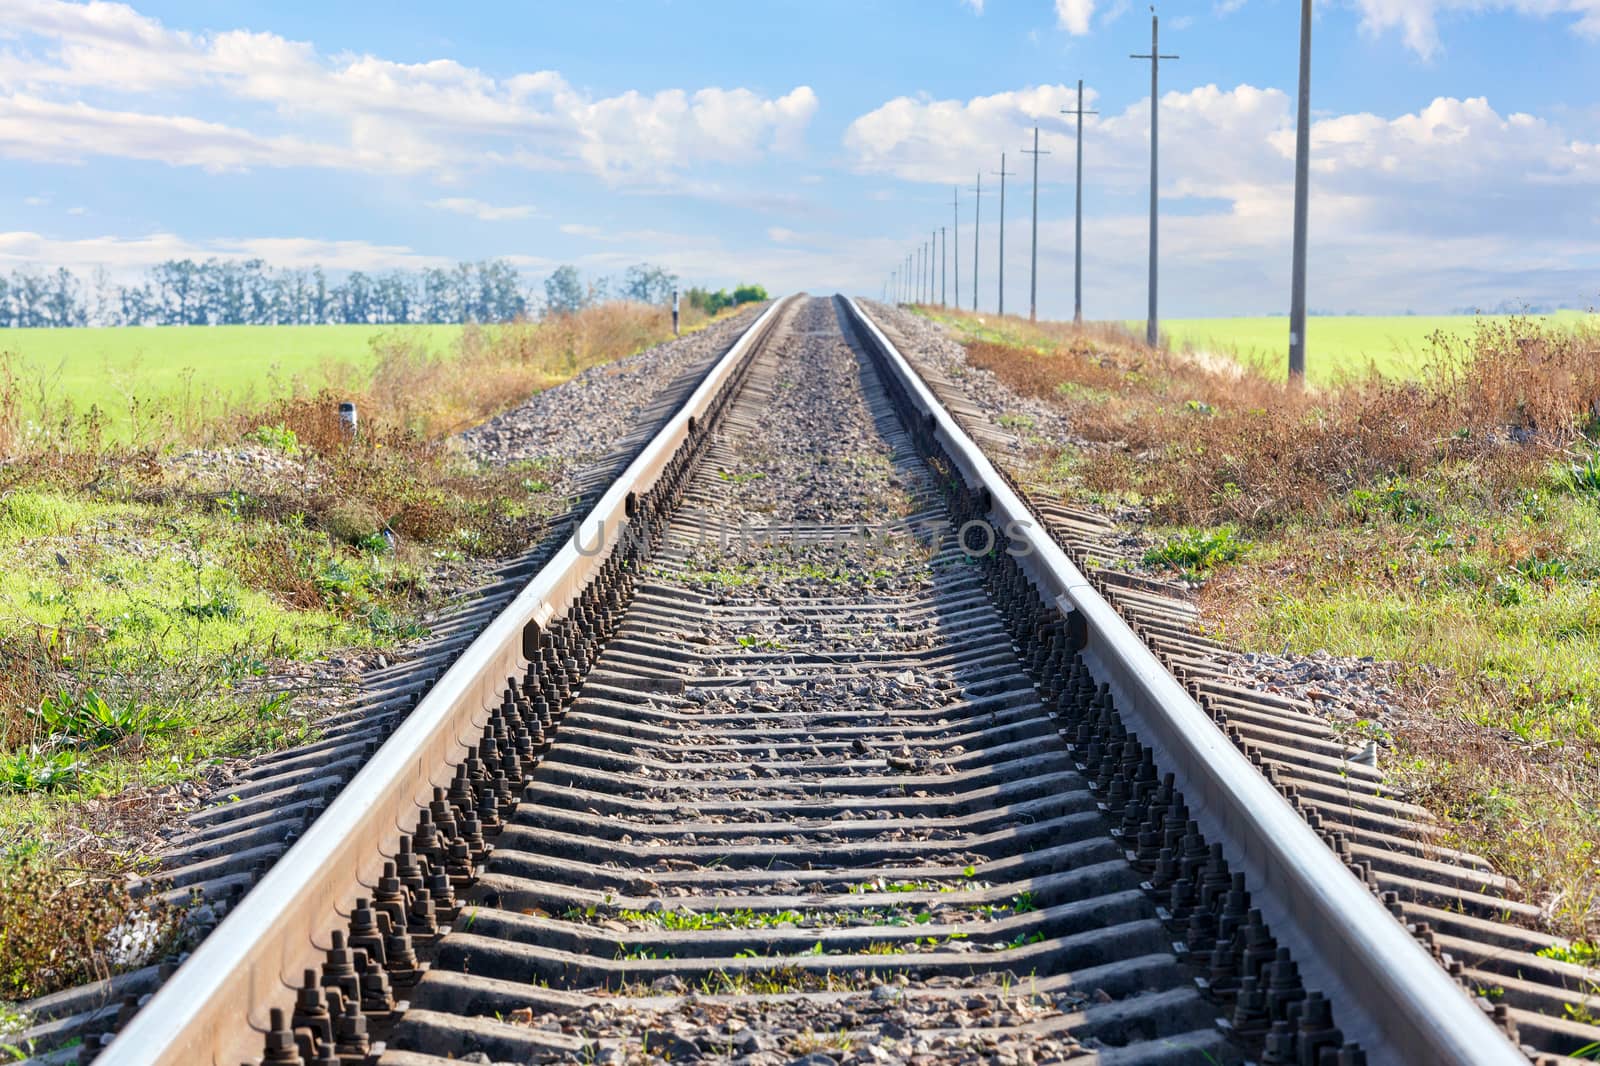 A single railroad track is laid among the field against the backdrop of a rural landscape and a light haze on the horizon, central composition, selective focus.